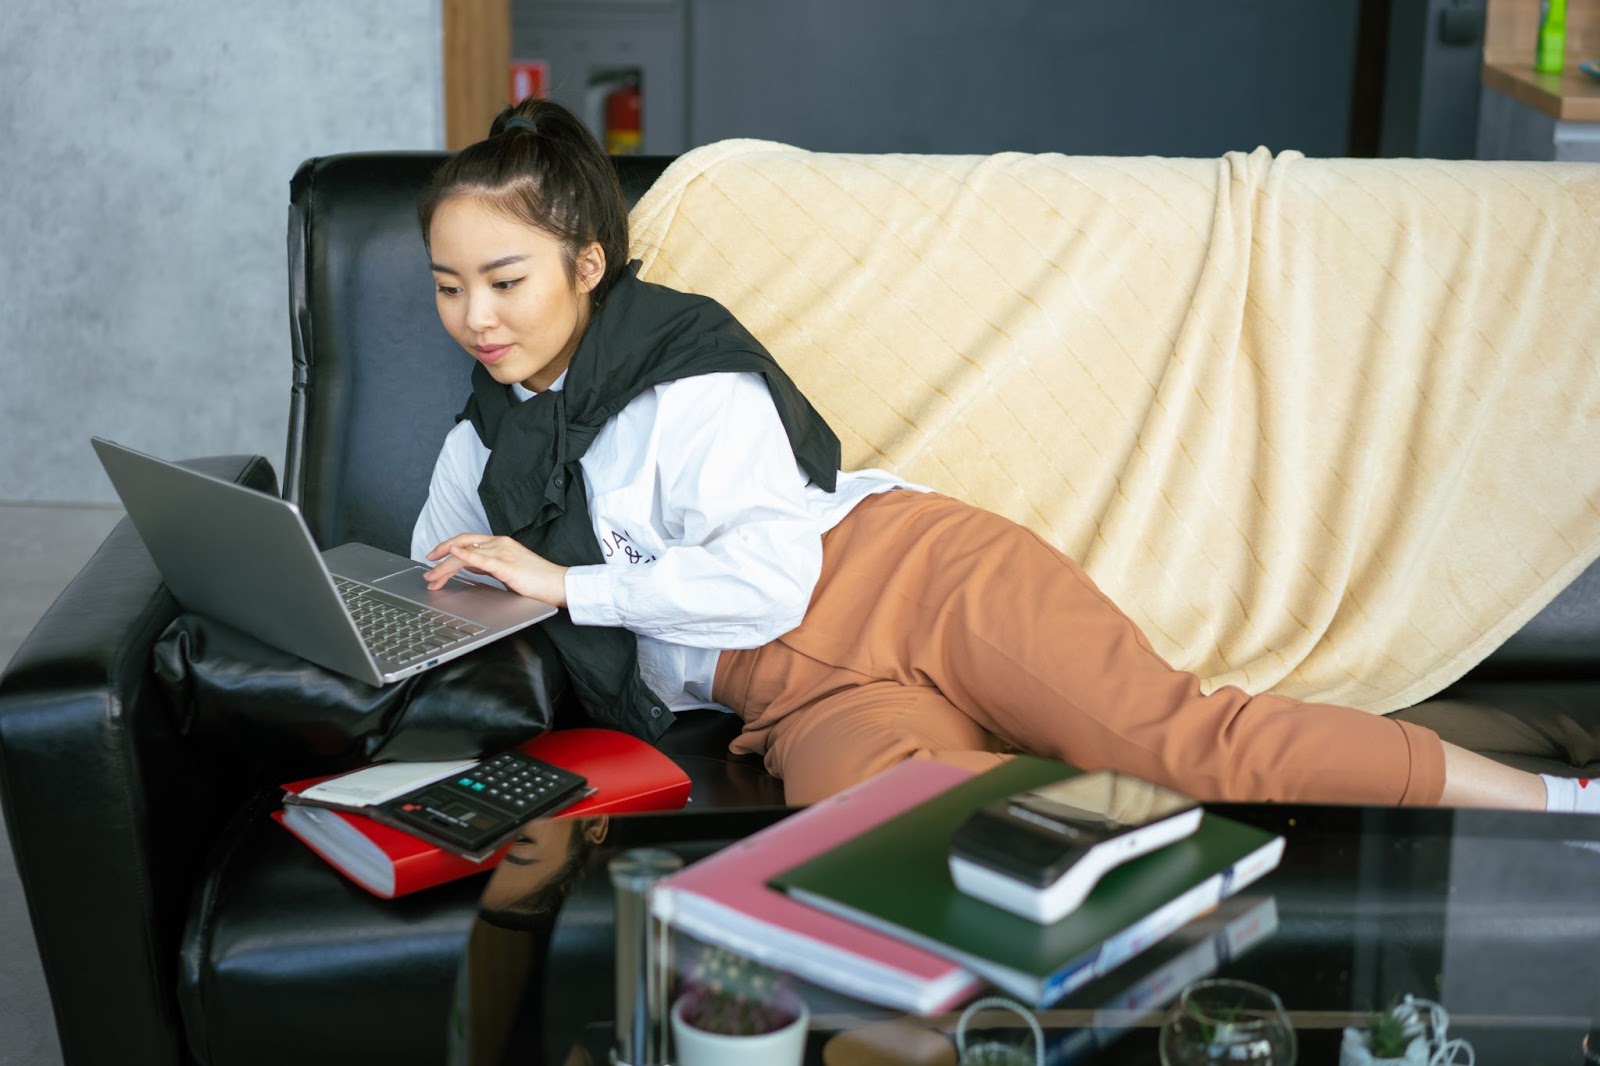 A girl  lying on a couch looking at her computer -Interning Remotely - 7 Most Unexpected Challenges 
Photo by Mikhail Nilov from Pexels